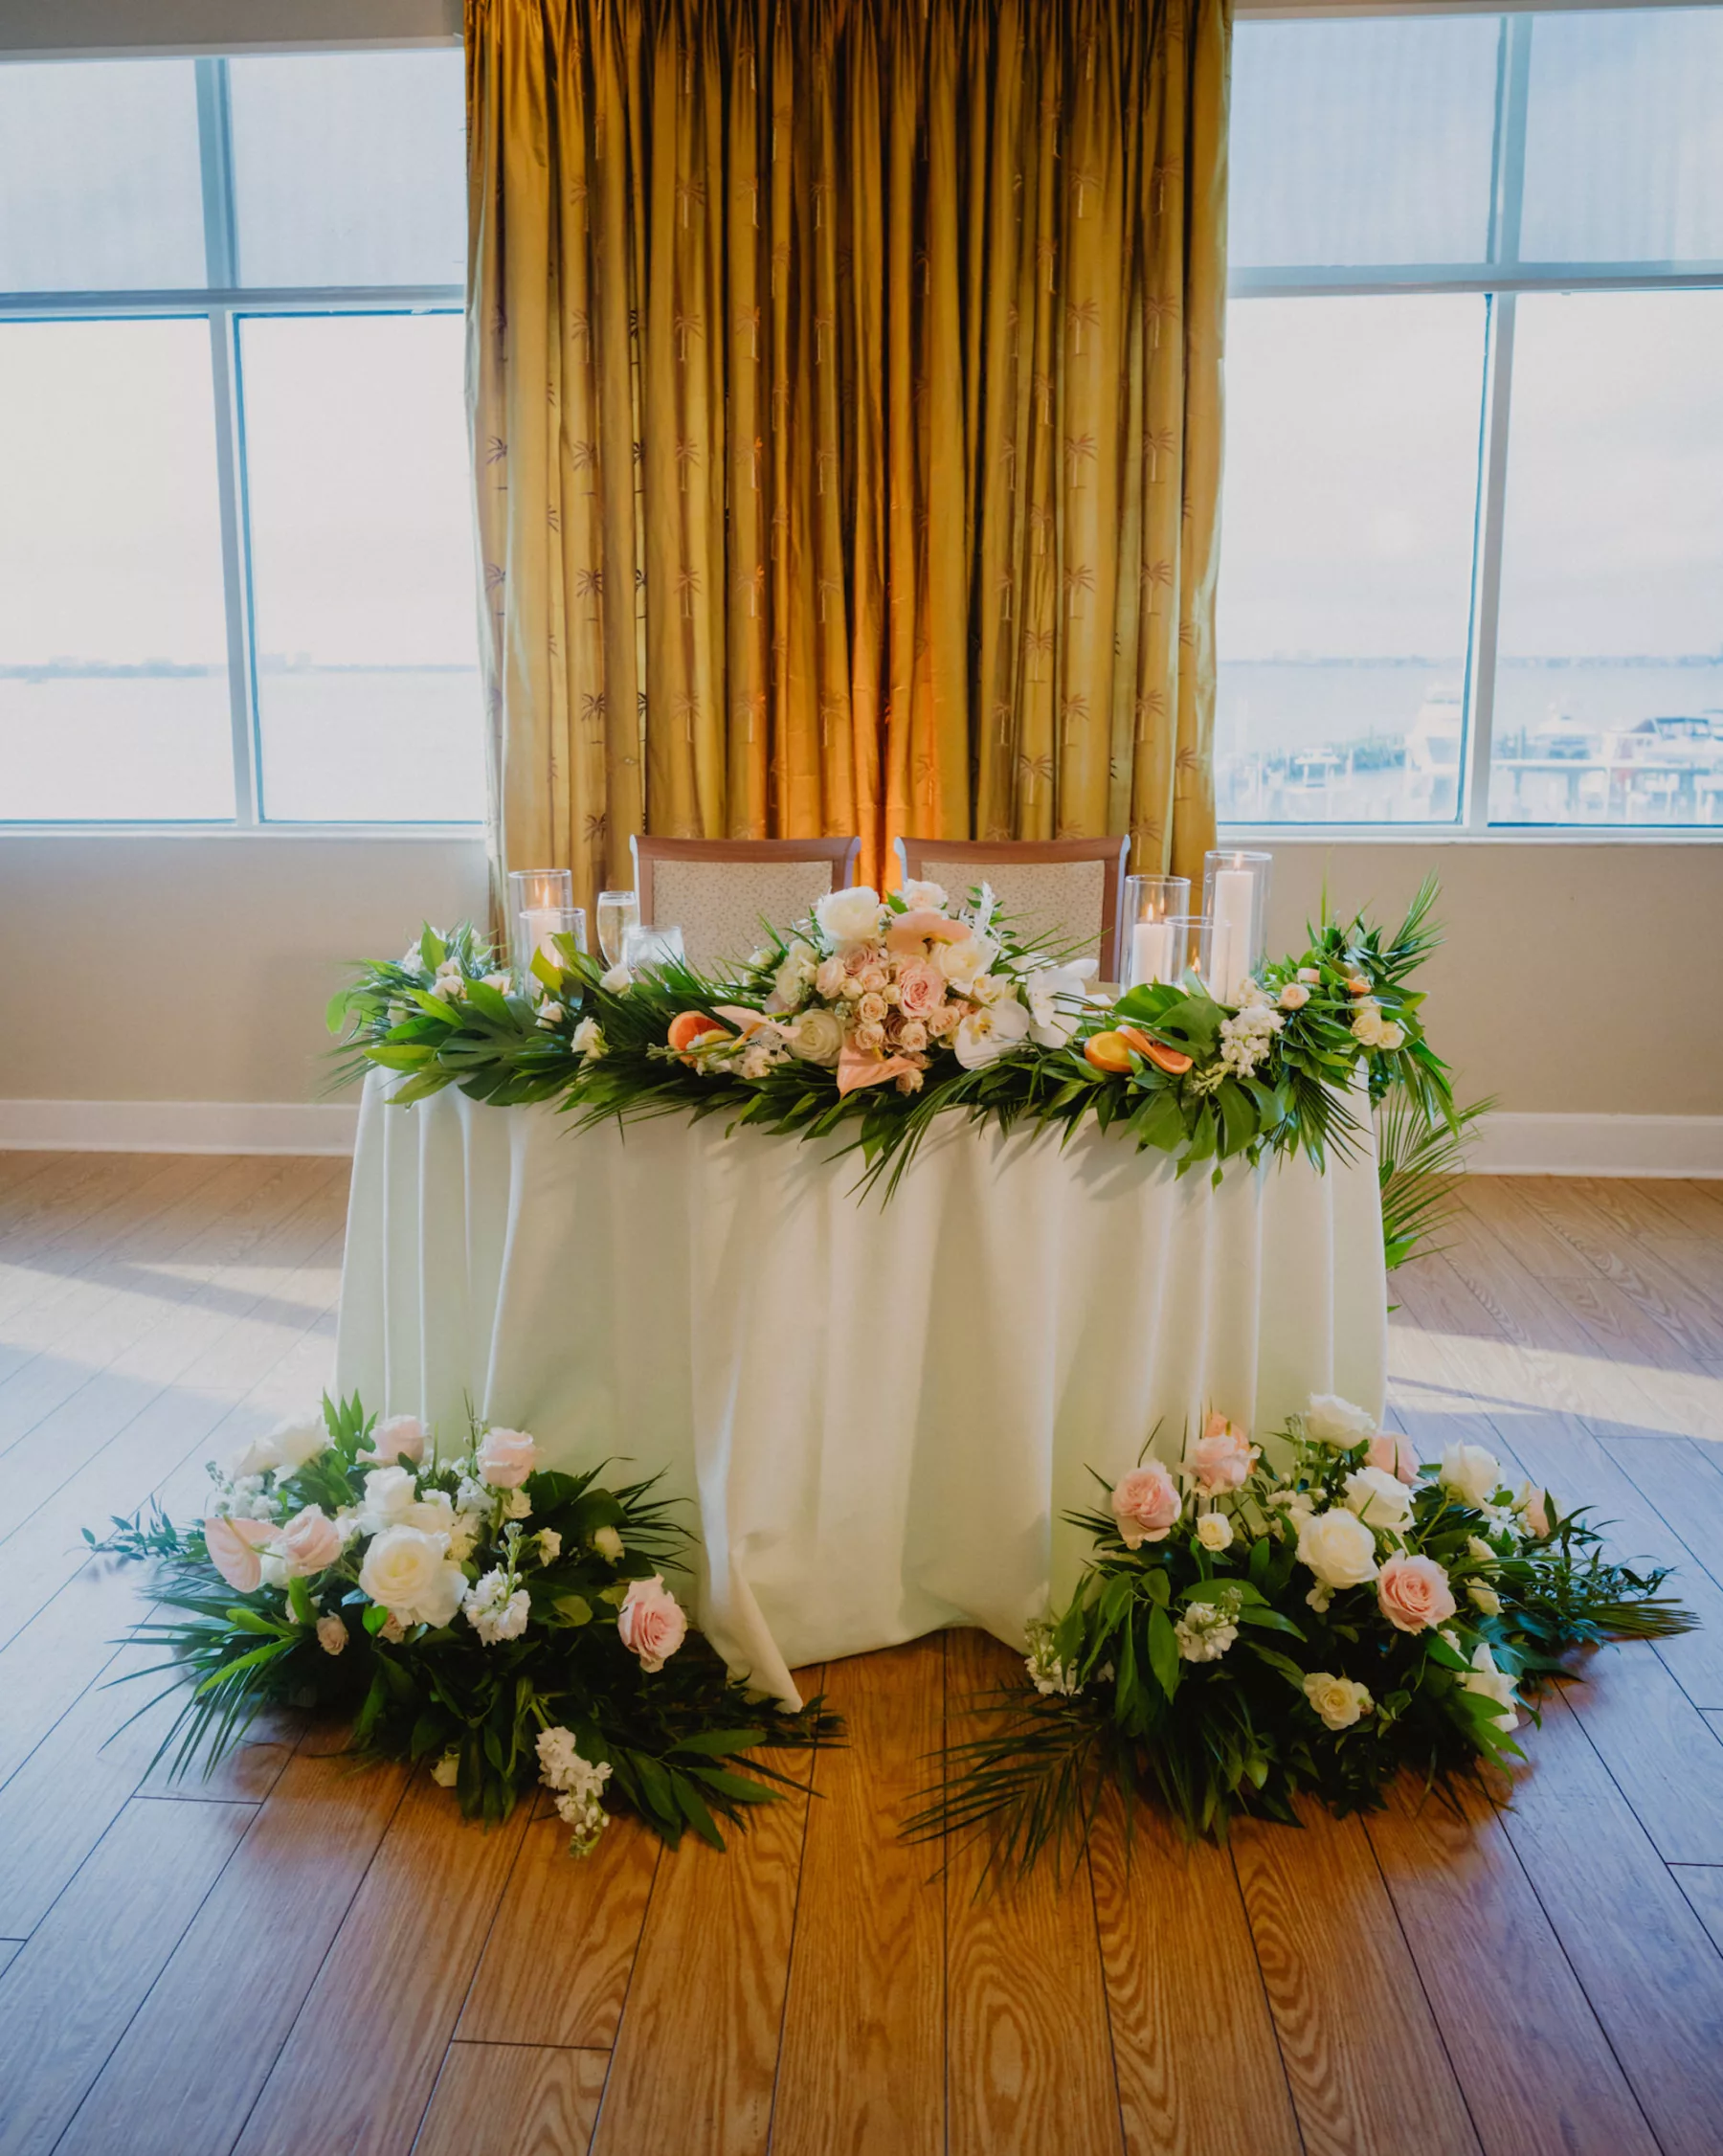 Tropical Wedding Reception Sweetheart Table Decor Inspiration | Elegant Pink and White Roses, Anthurium, Stock Flowers, Monstera Leaf, and Palm Frond Spring Floral Arrangements | Tampa Bay Florist Monarch Events and Design